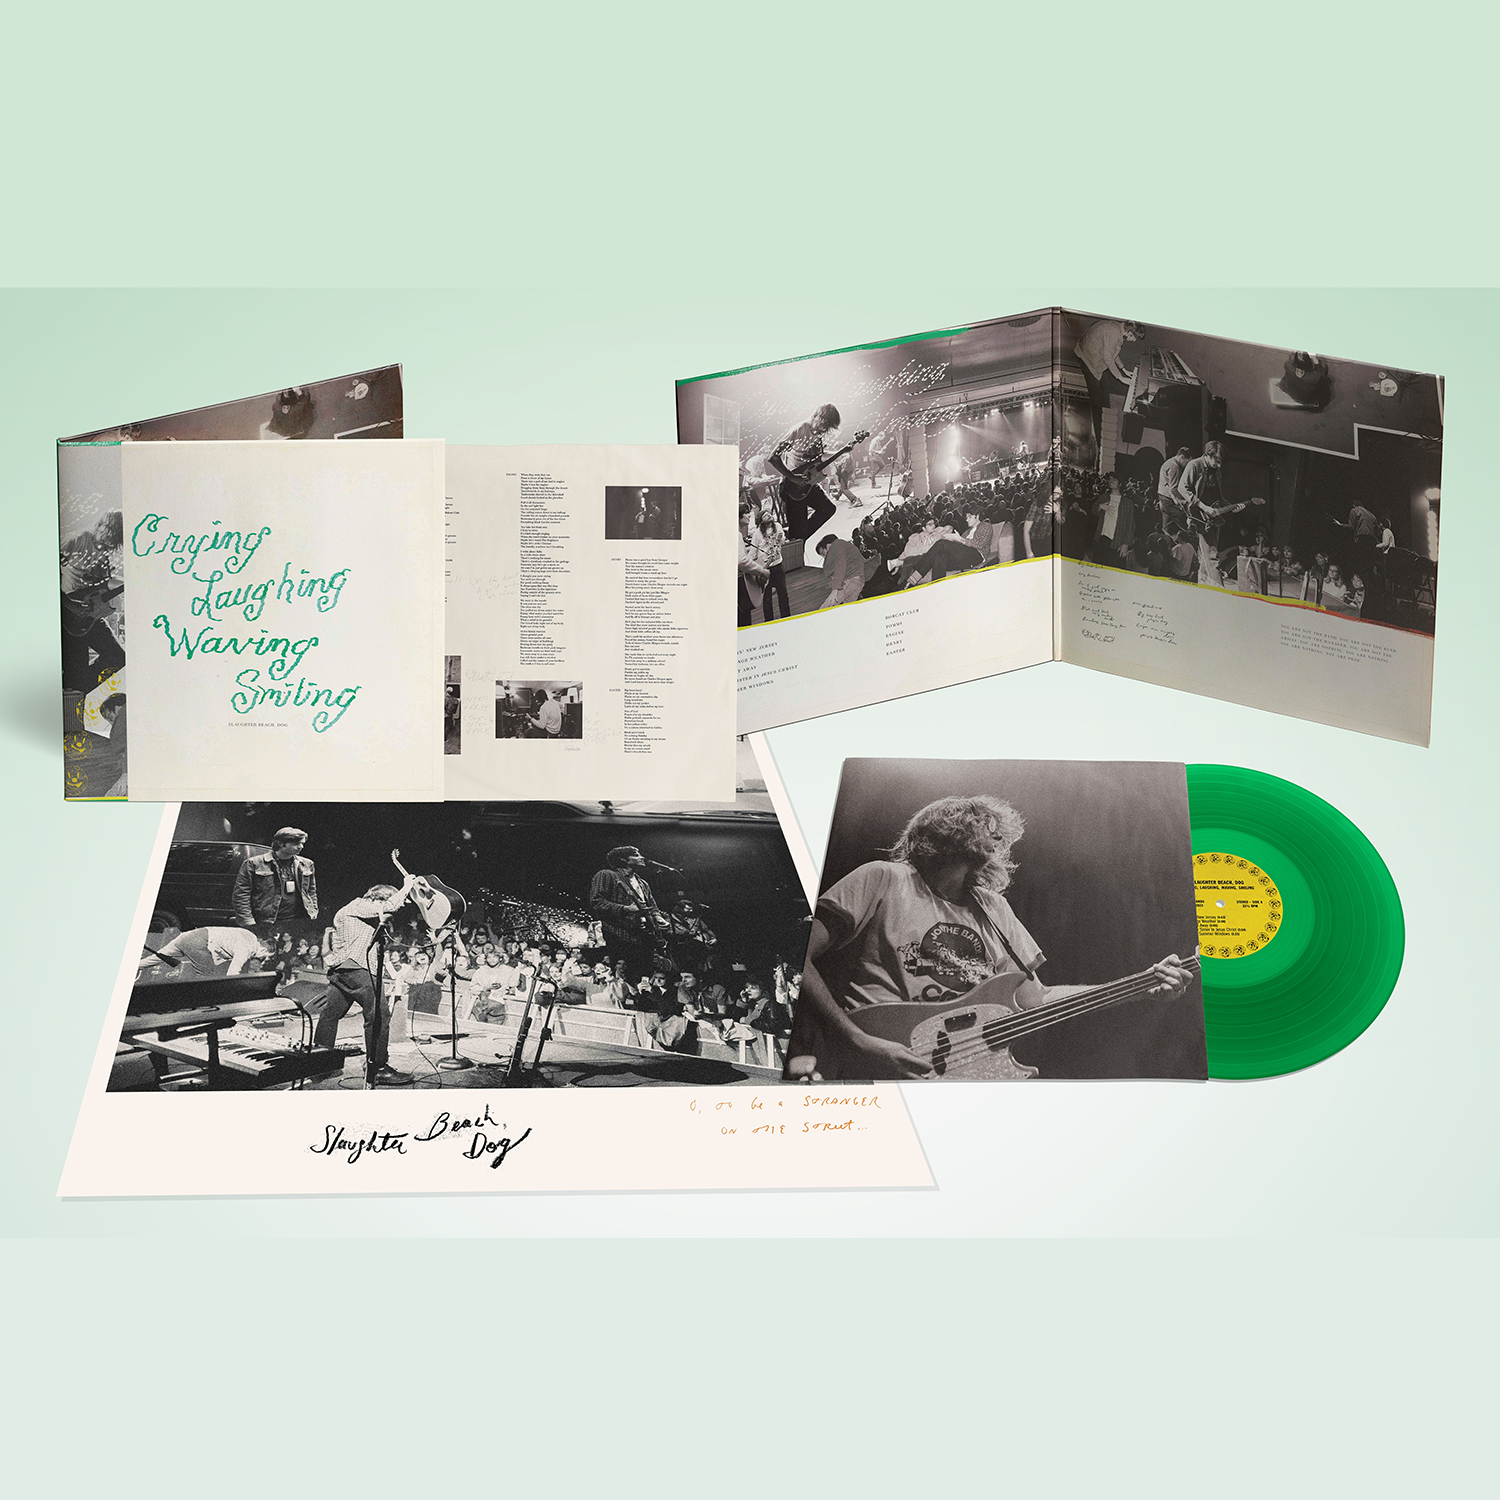 Slaughter Beach, Dog - Crying, Laughing, Waving, Smiling: Limited Green Vinyl LP